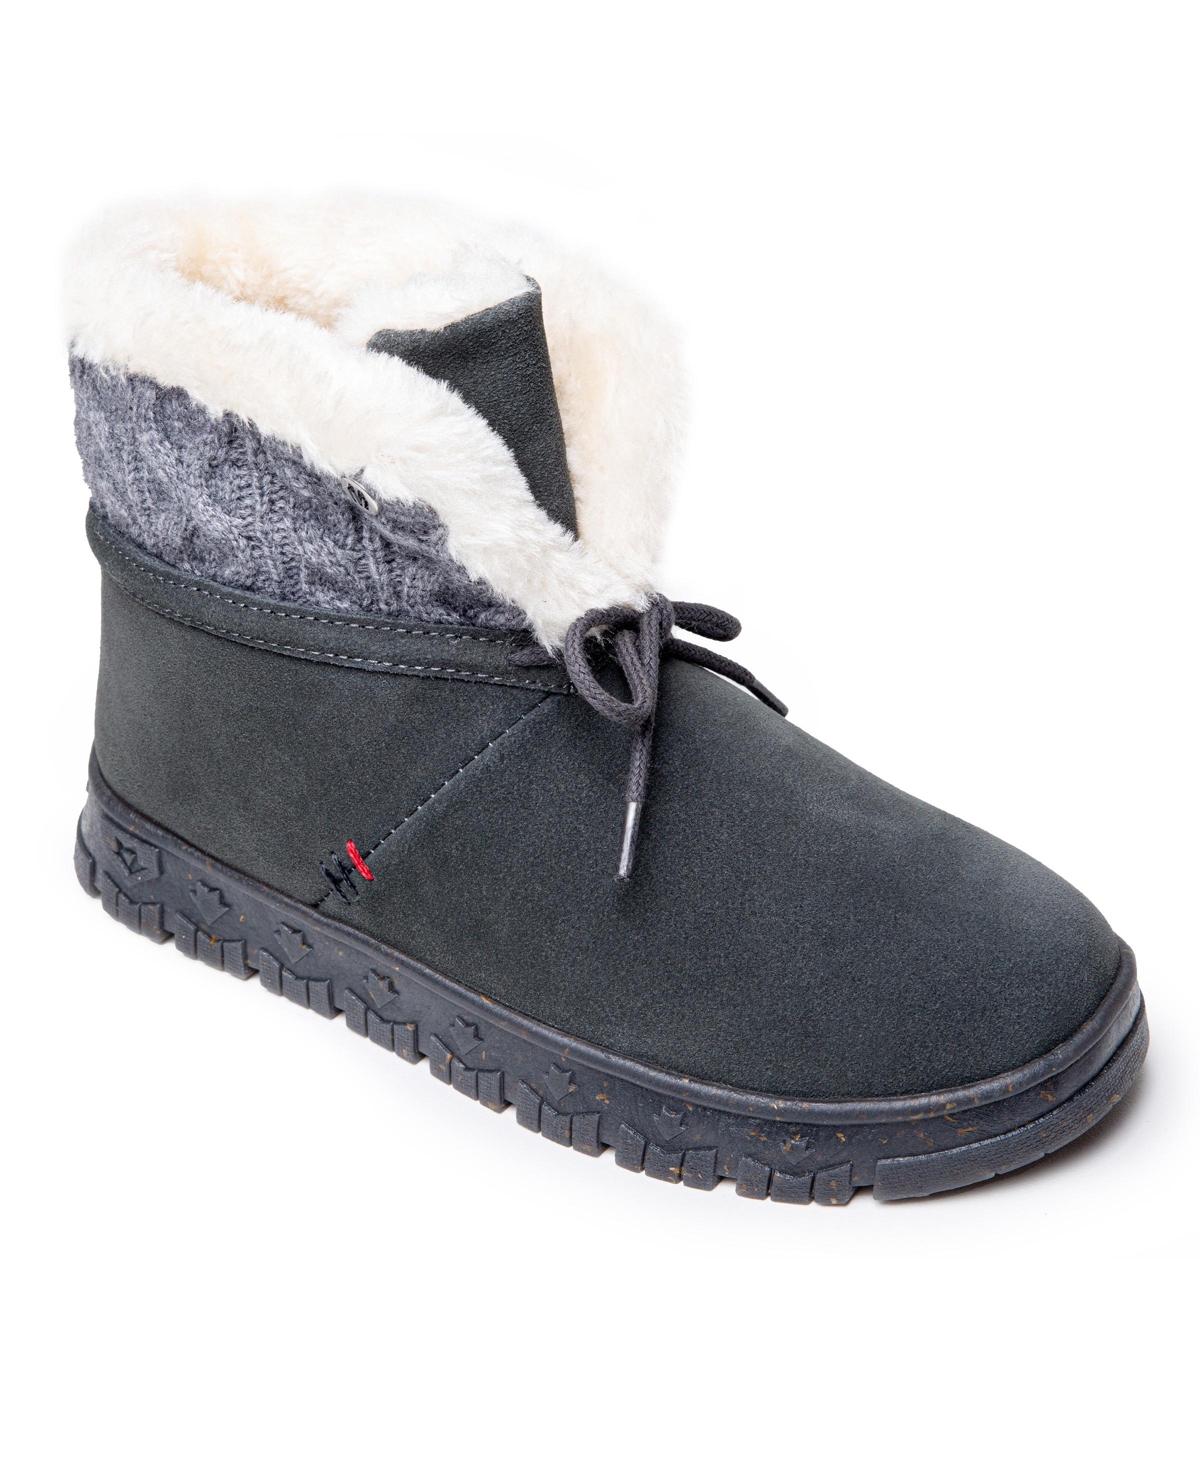 Women's Norean Suede & Knit Slipper Boots - Charcoal